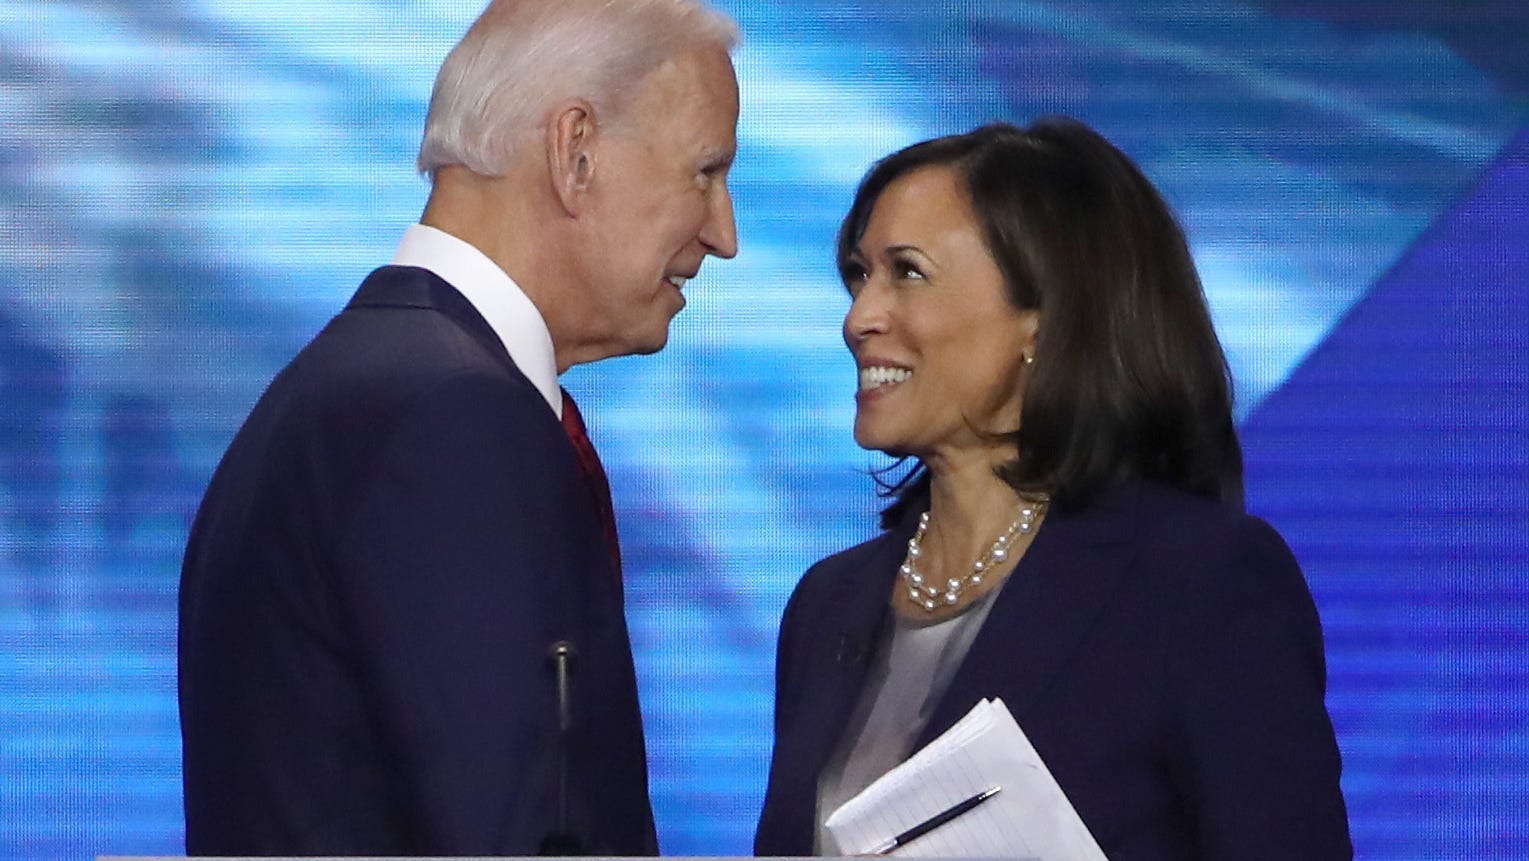 Biden's VP pick 72 of Democrats want a woman of color on the ticket